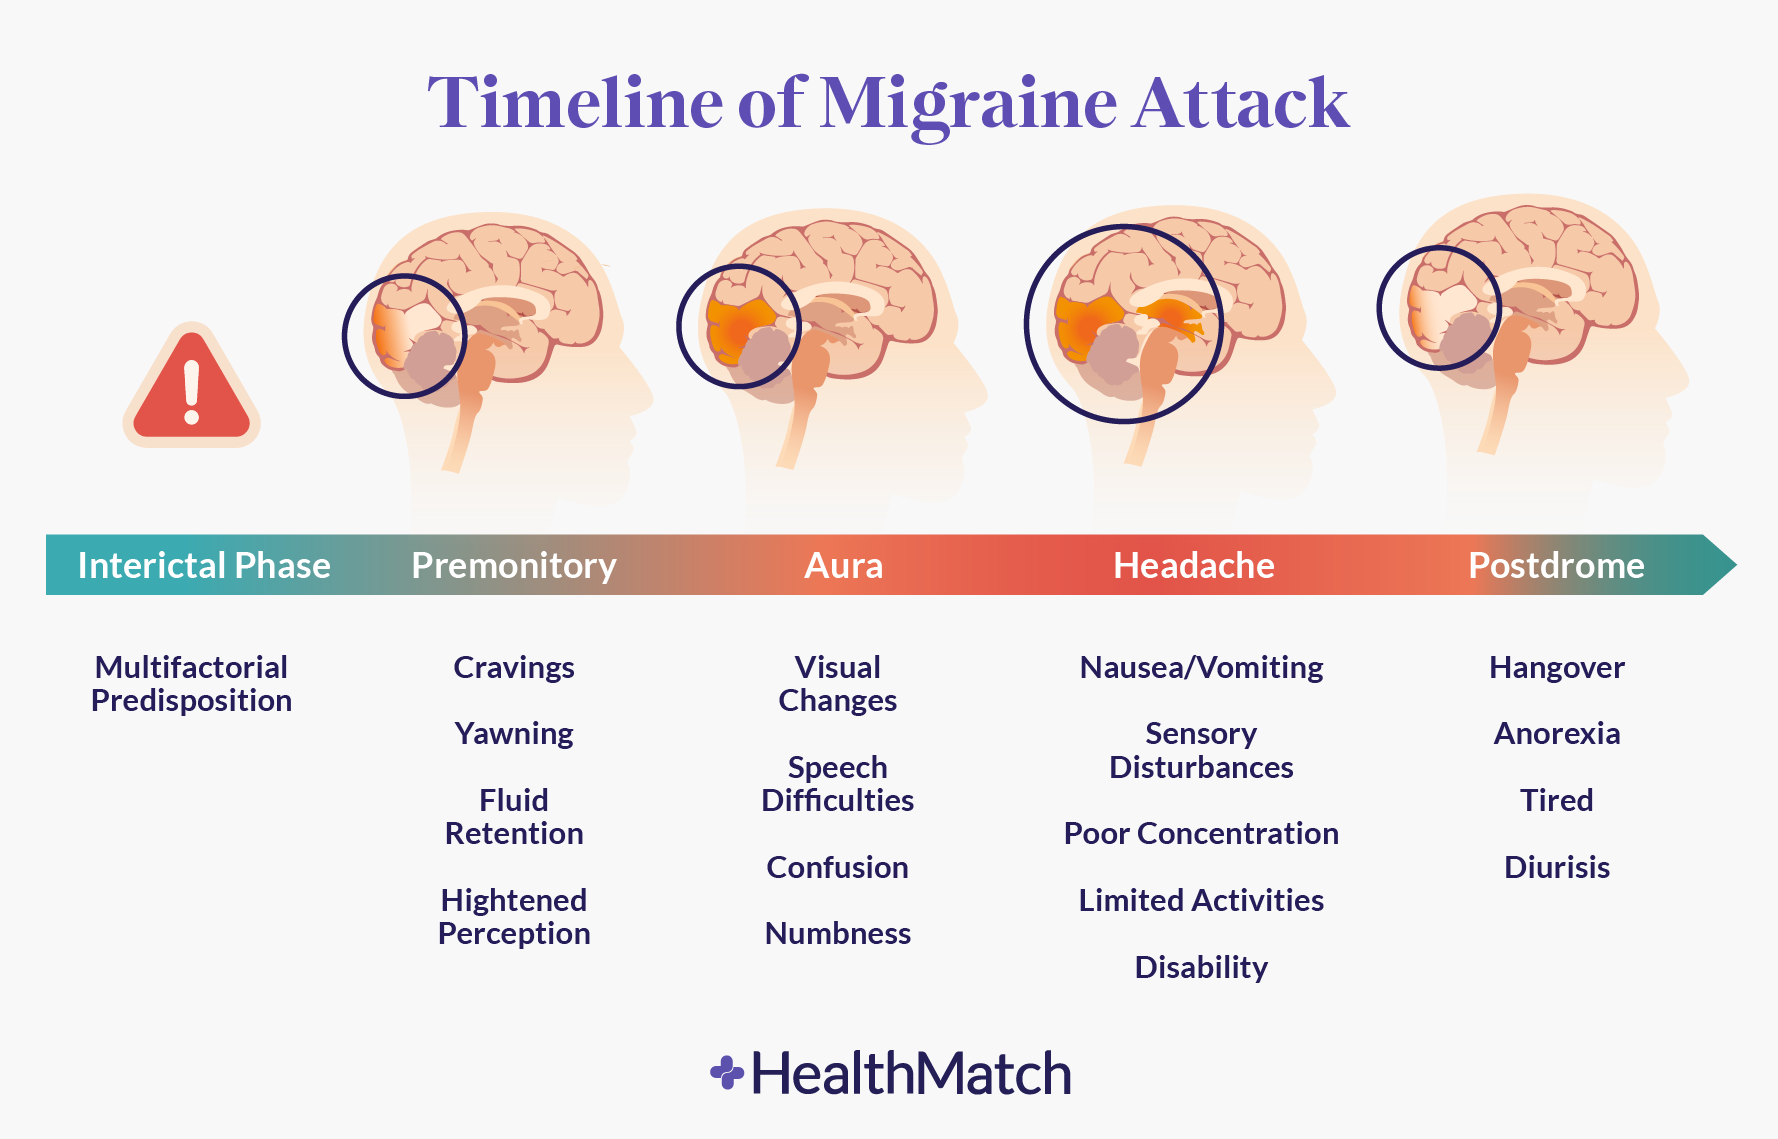 Antimigraine Drugs - an overview